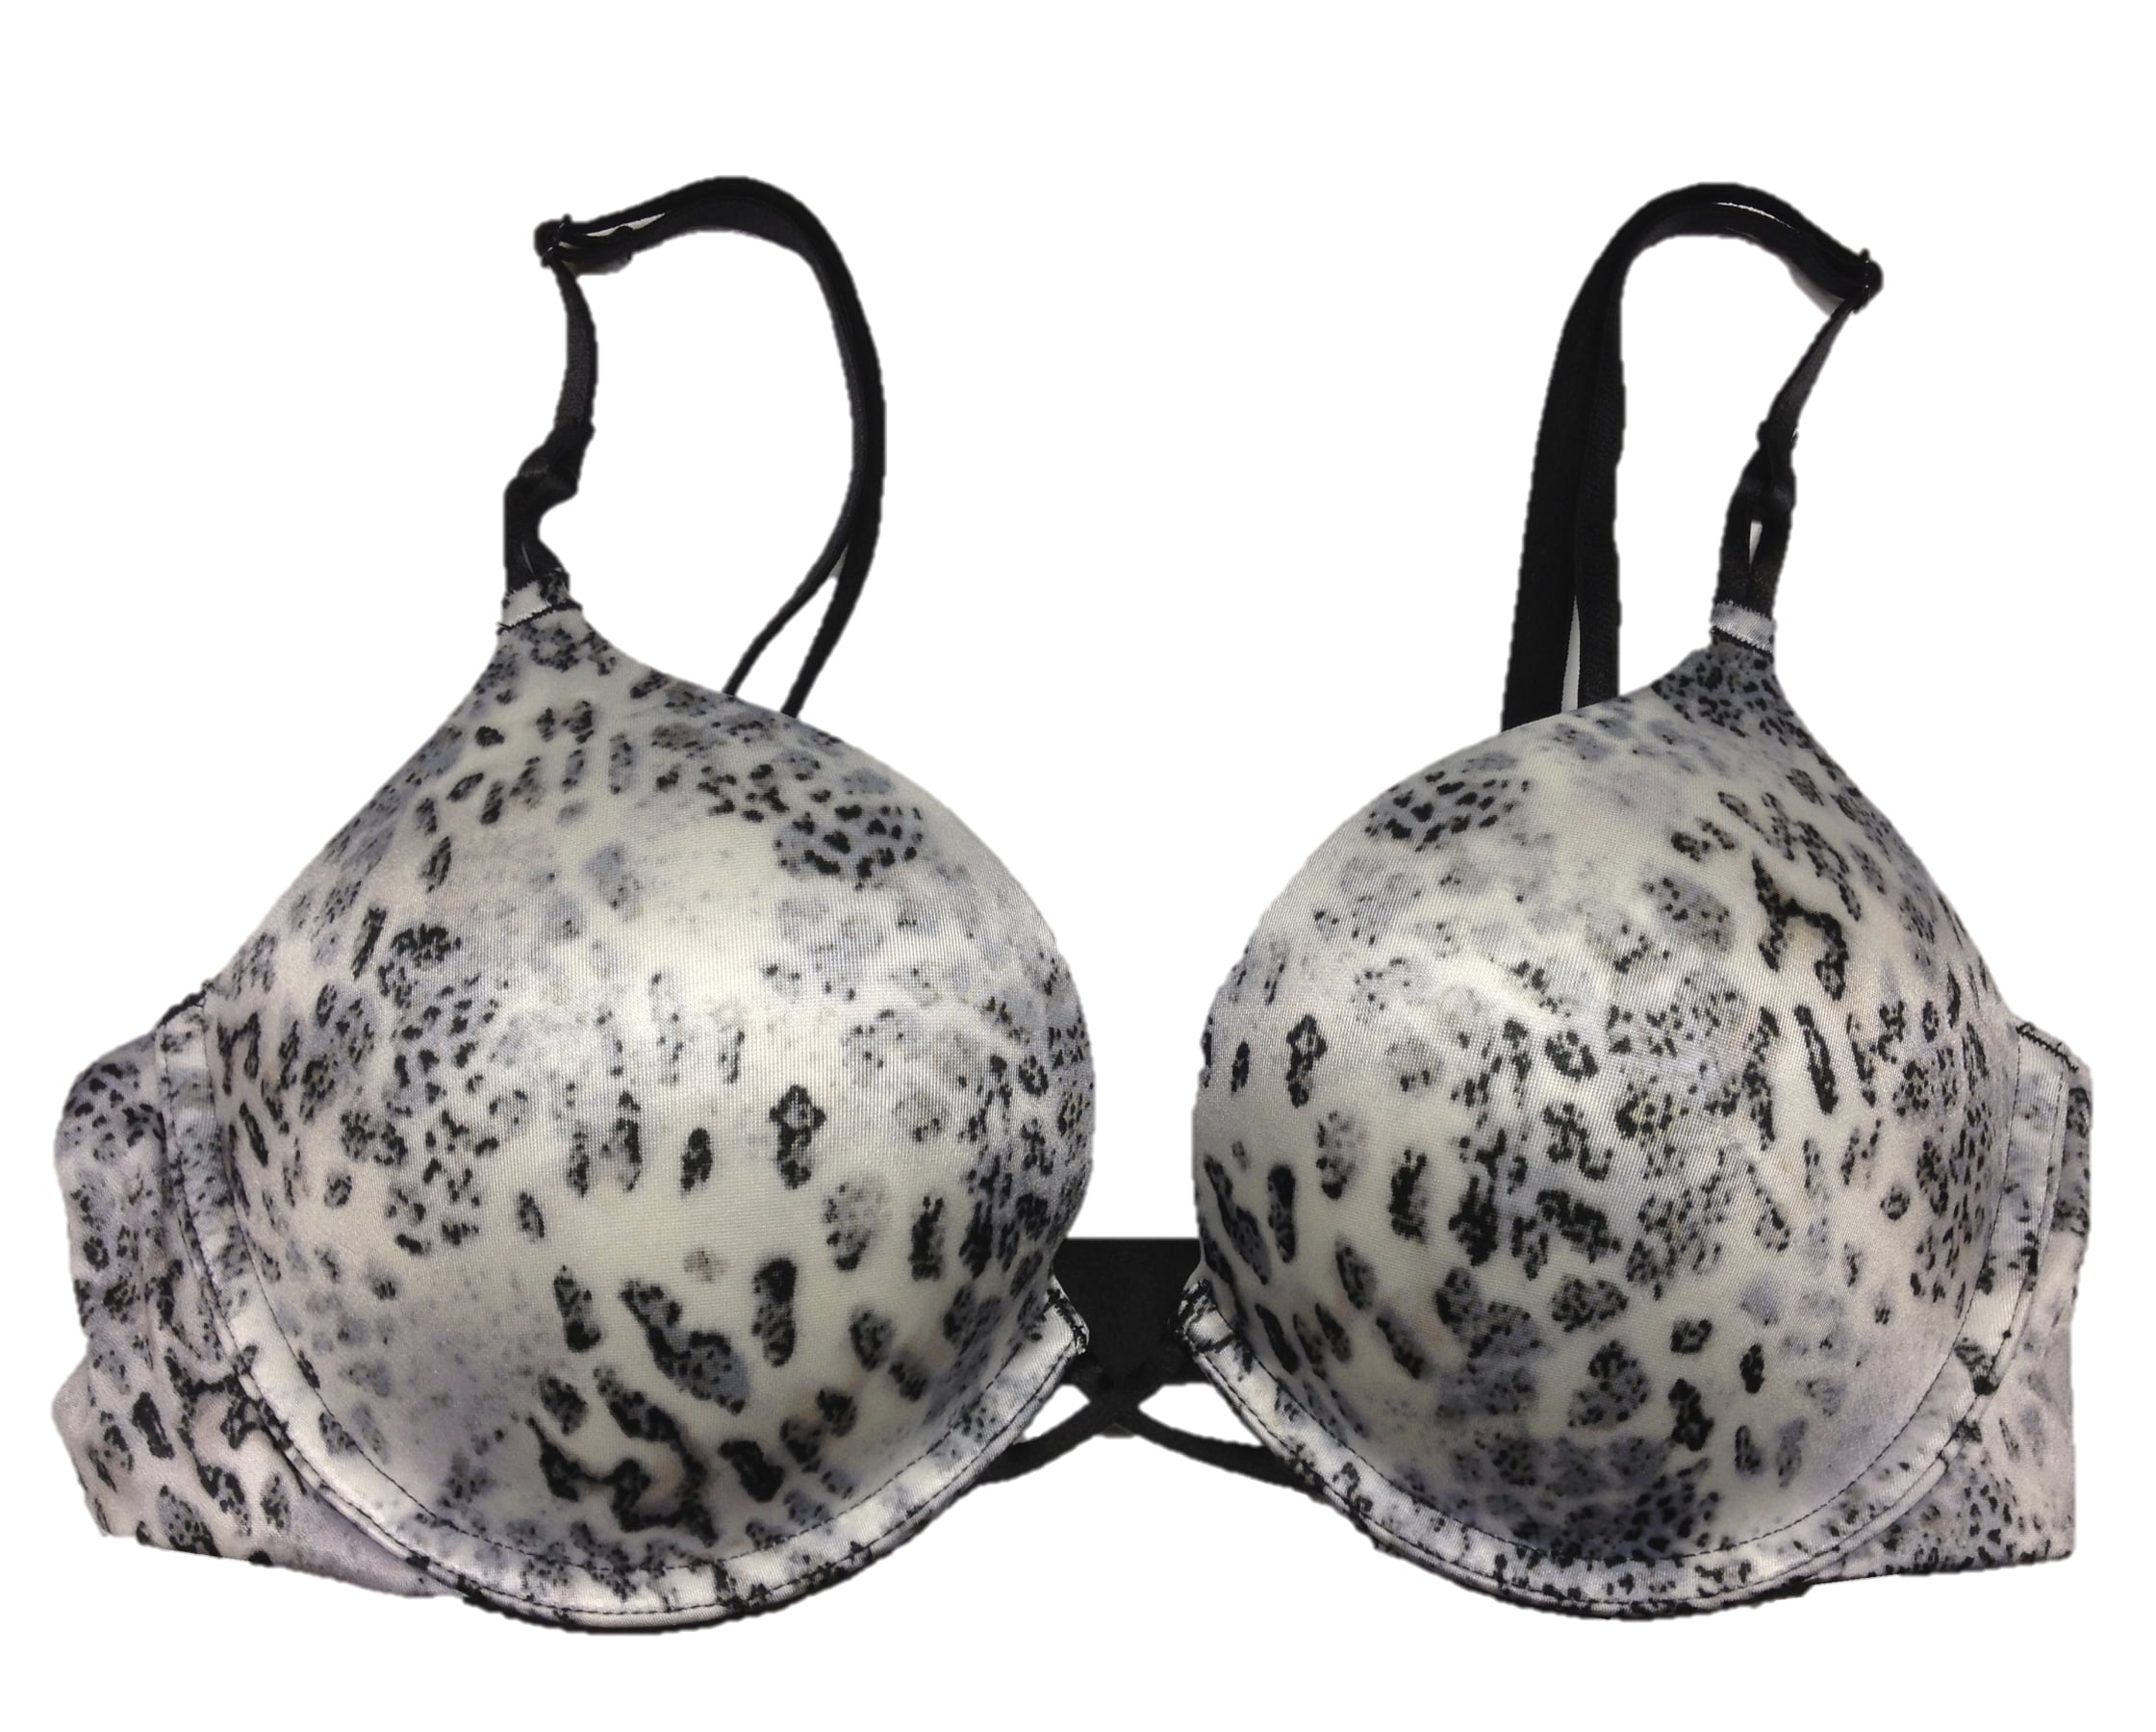 Details about   SUPER PUSH UP BRA BOMBSHELL ADD TWO CUP SIZE BUNDLE 3 PIECES ILYS BRAND CUP B,C 